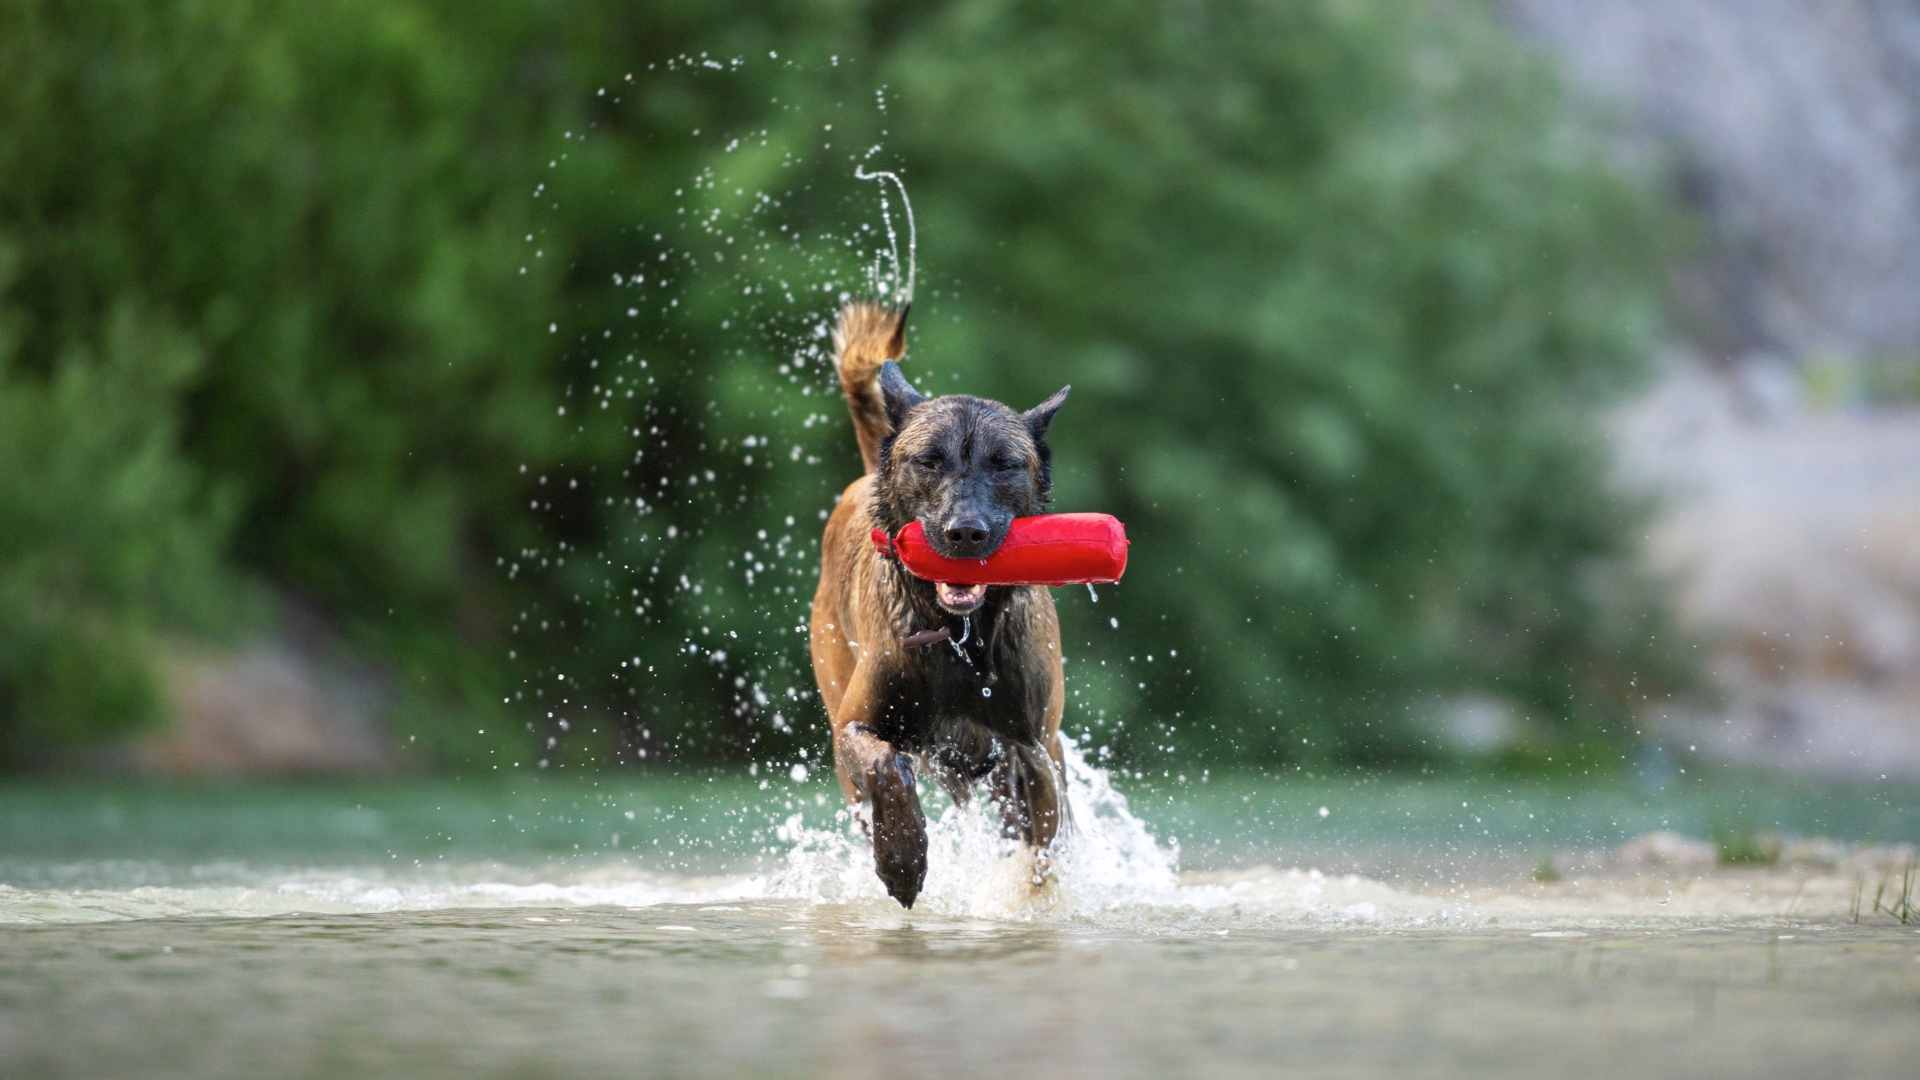 Dog Toys: How To Pick The Best And Safest